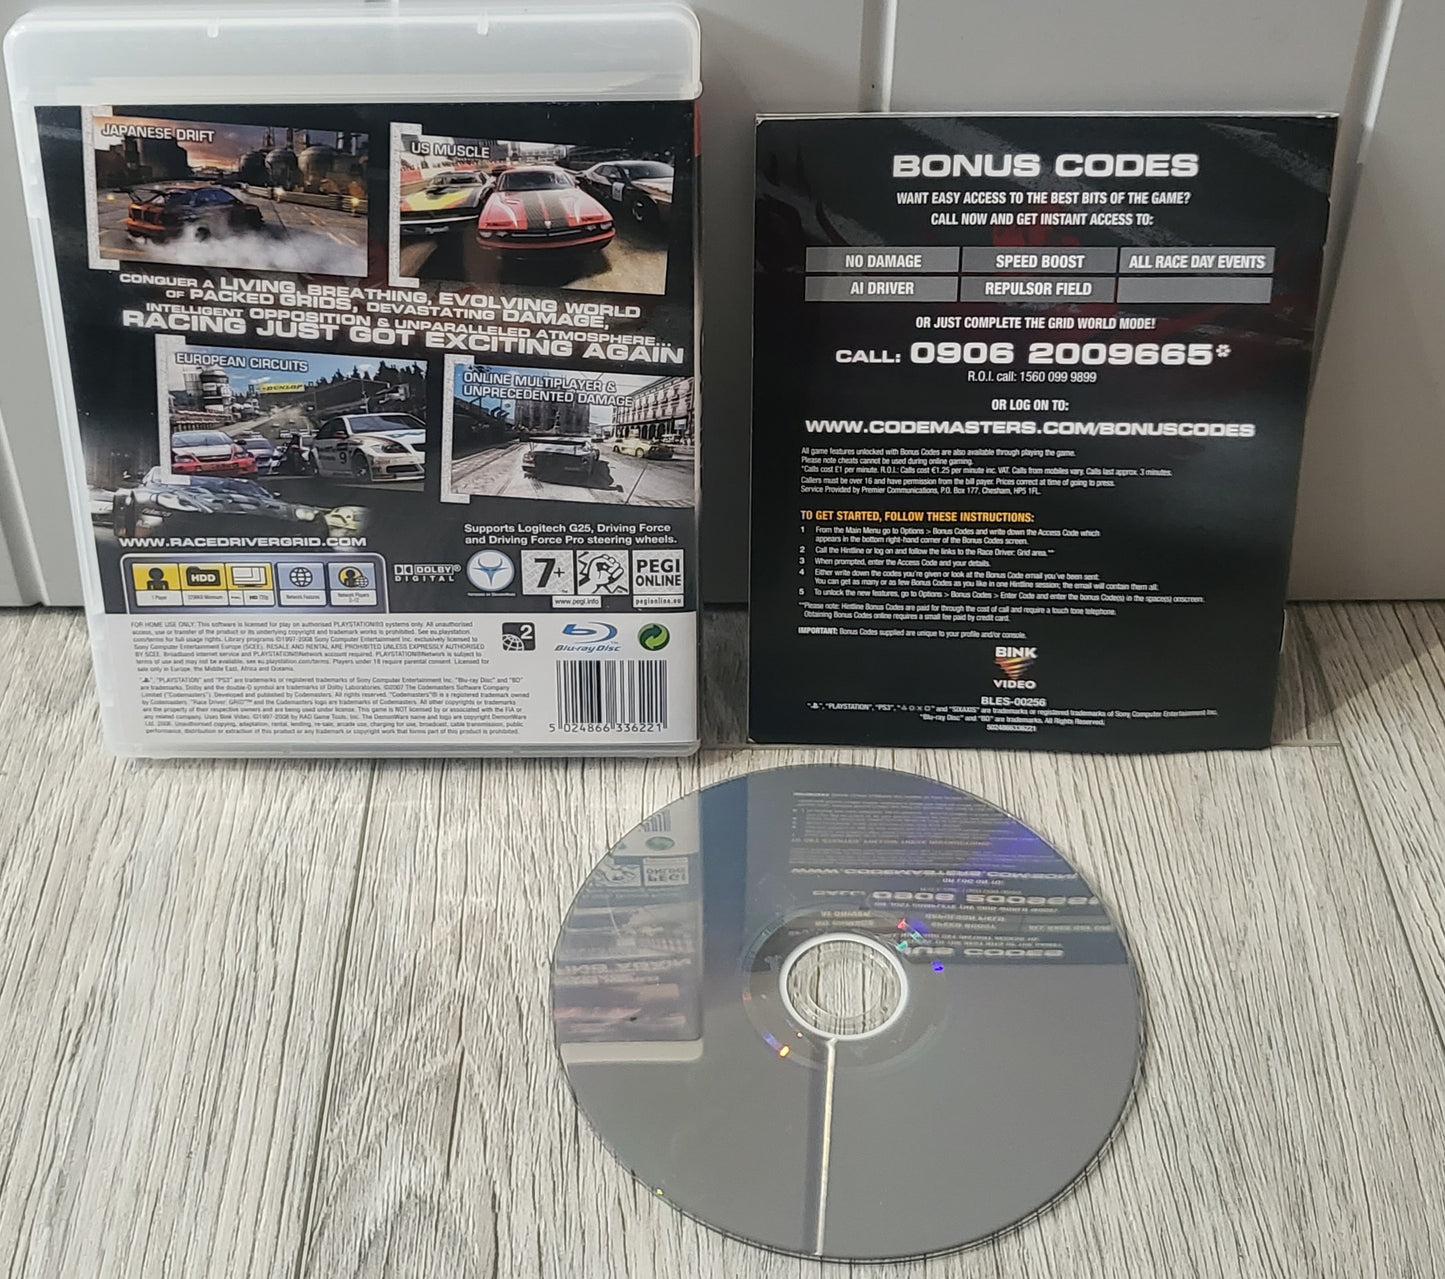 Racedriver Grid Sony Playstation 3 (PS3) Game